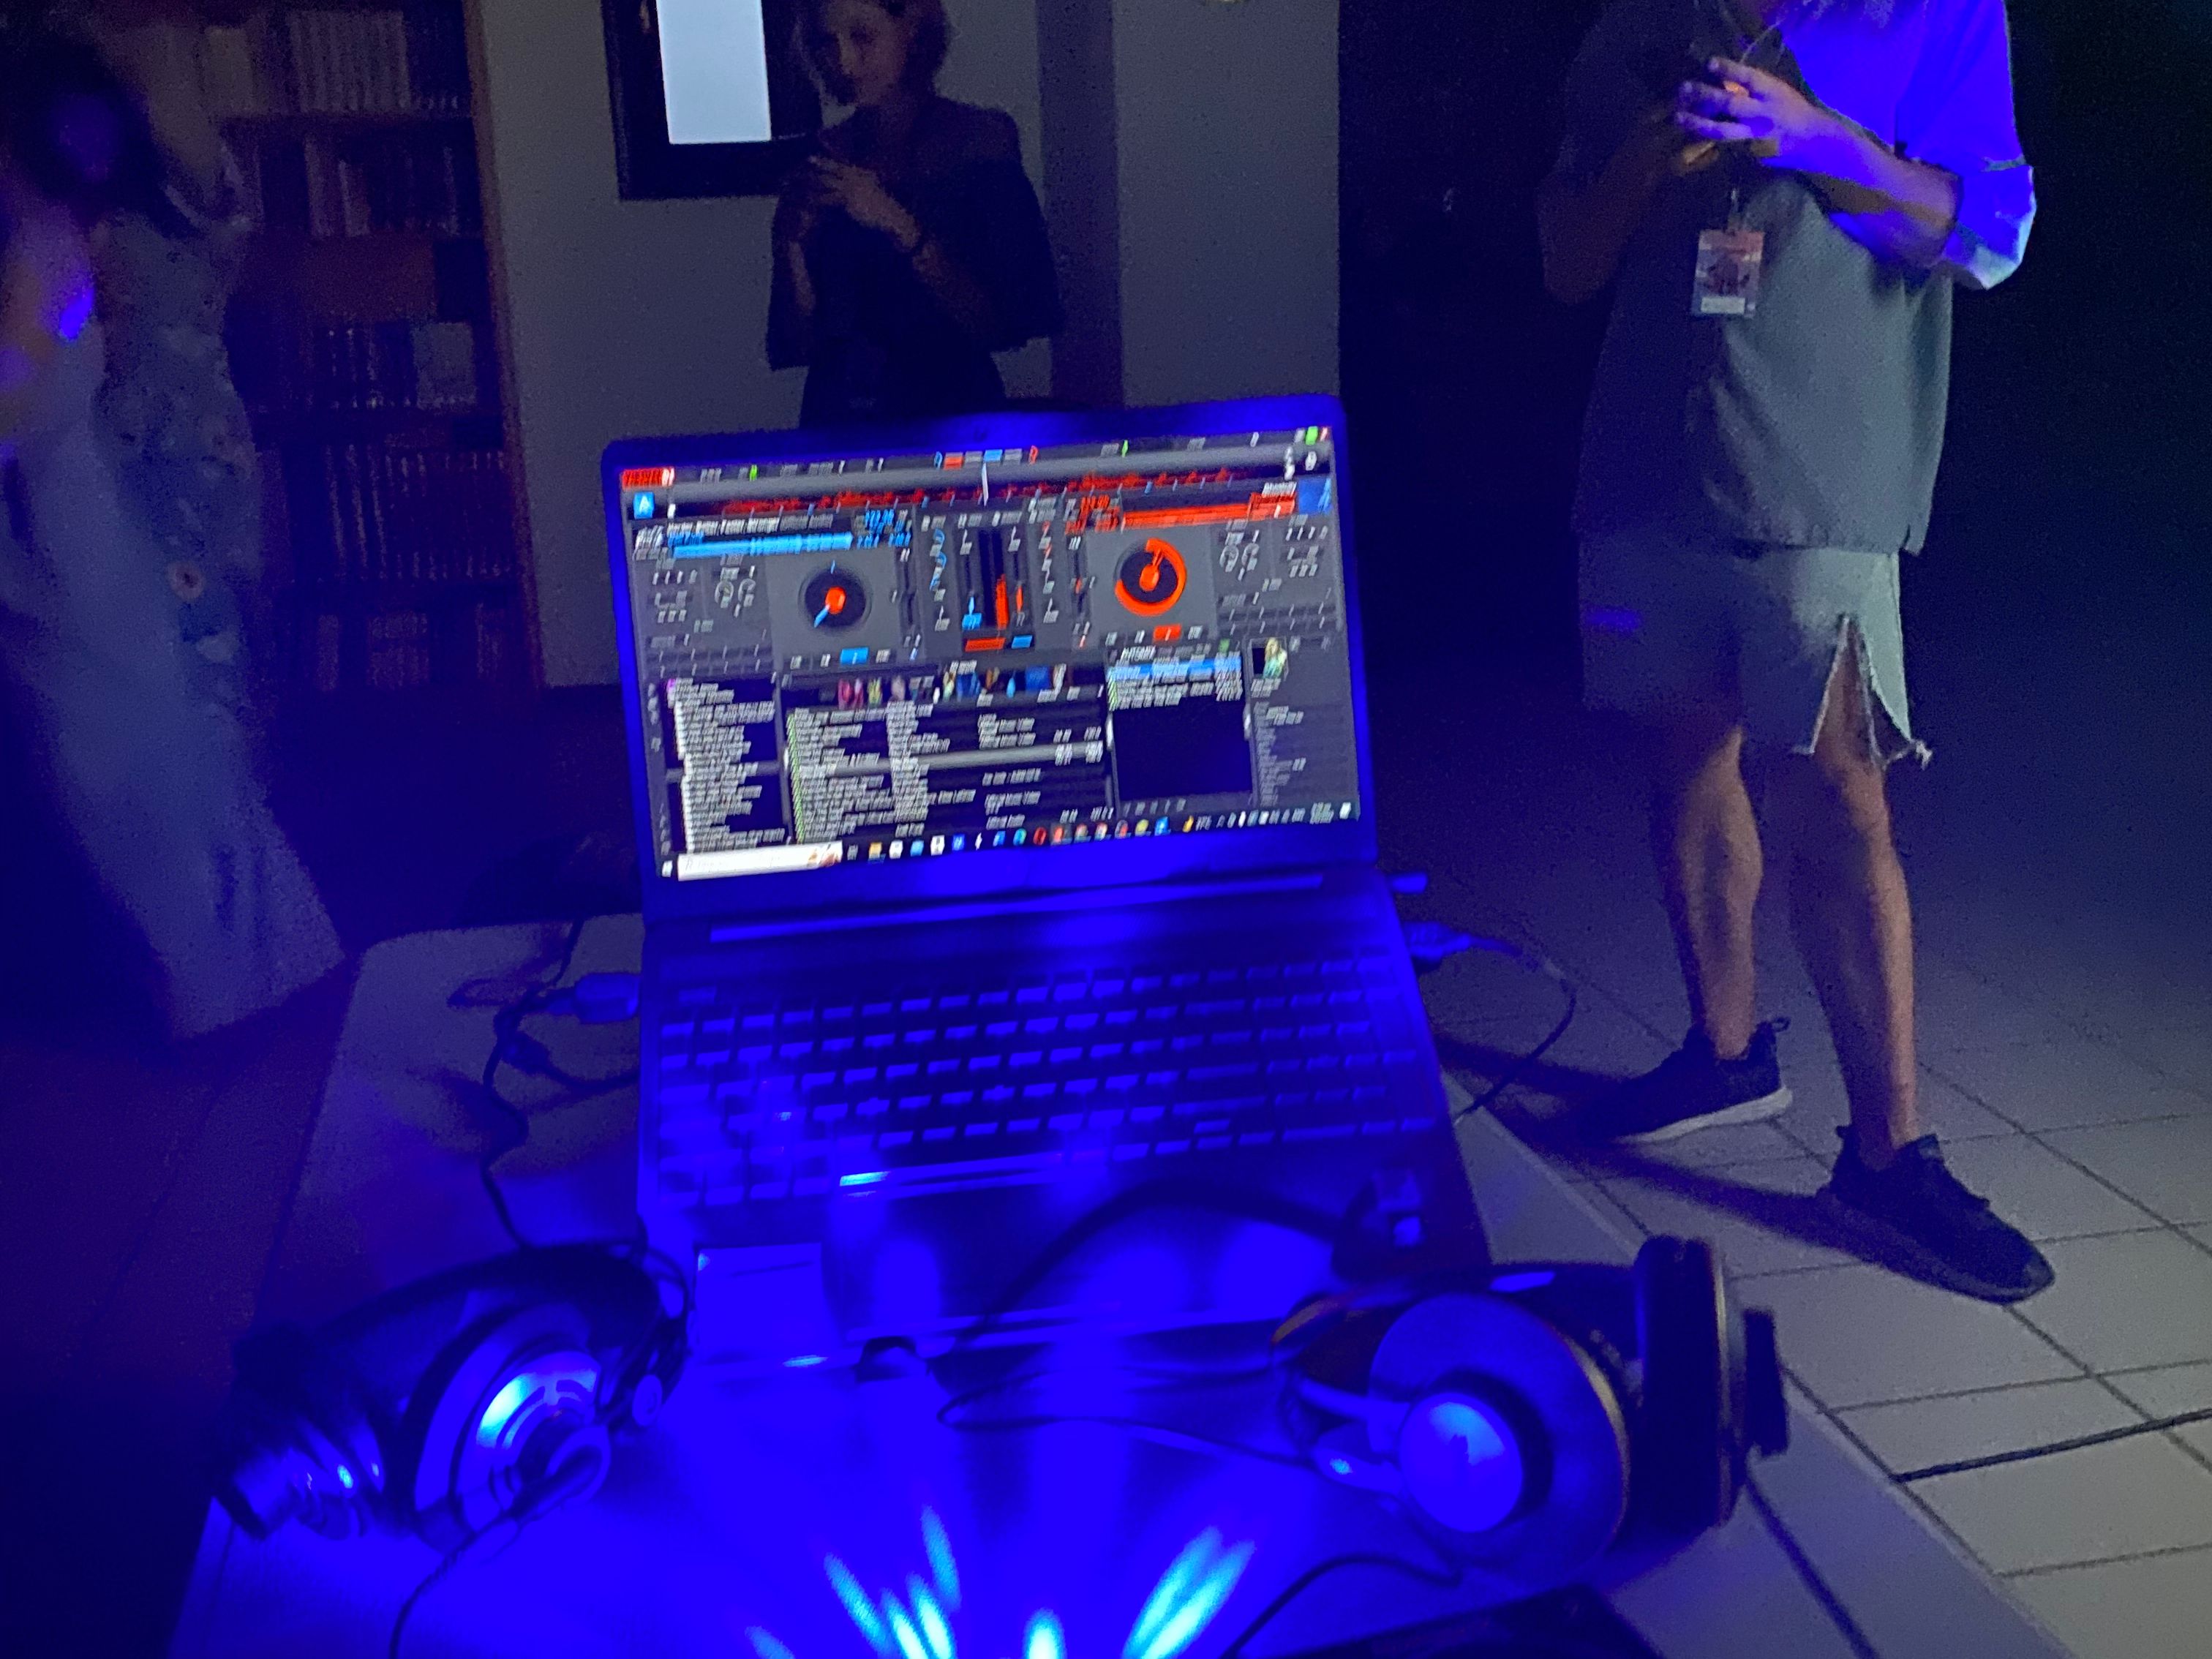 A lit-up DJ setup in a dark room with people in the background